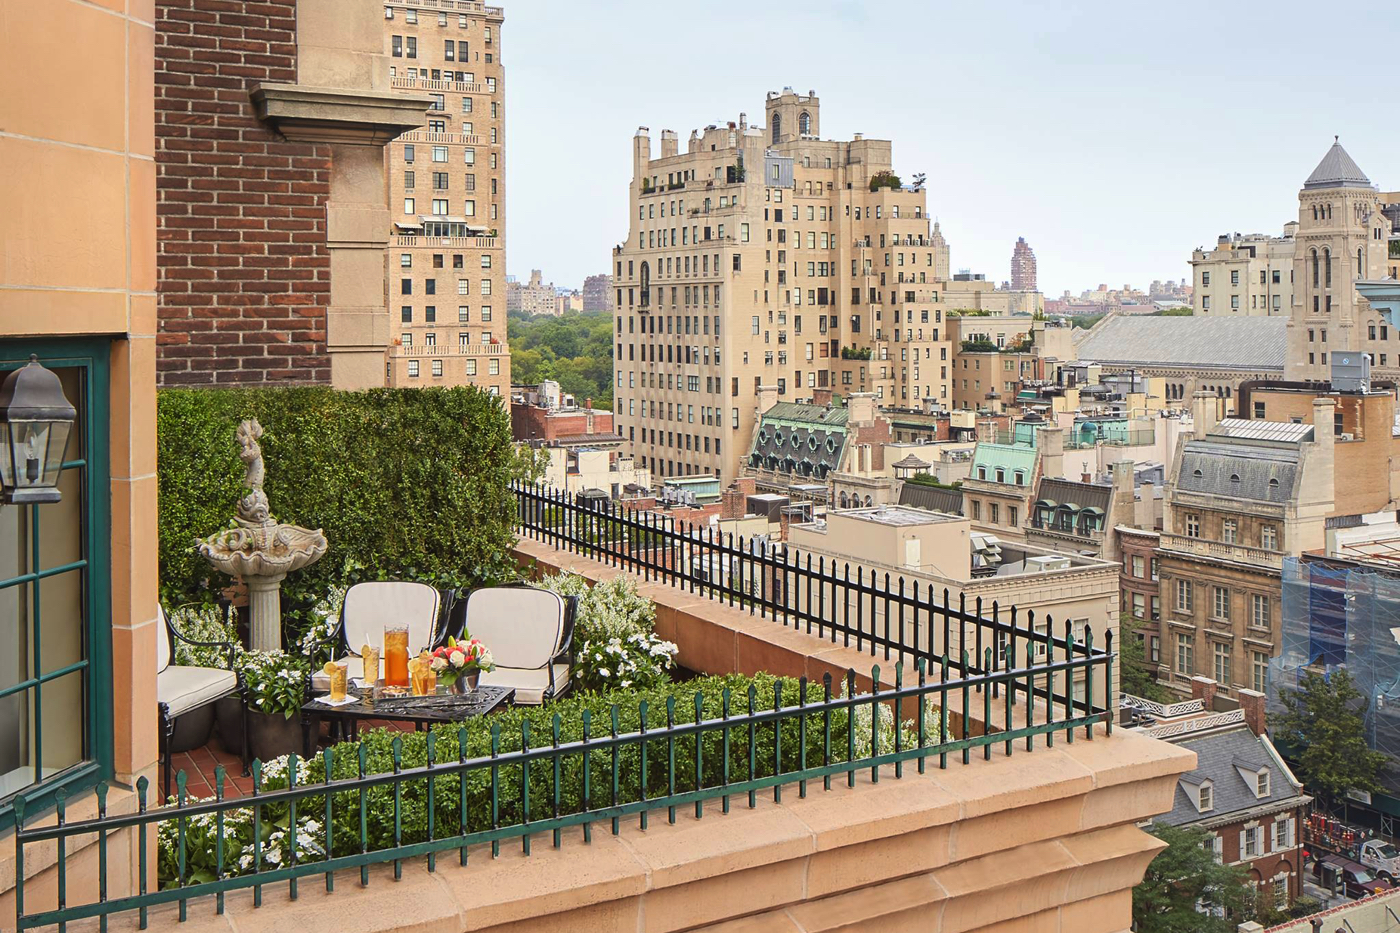 19 AMAZINGLY ROMANTIC HOTELS IN NYC YOU'LL LOVE